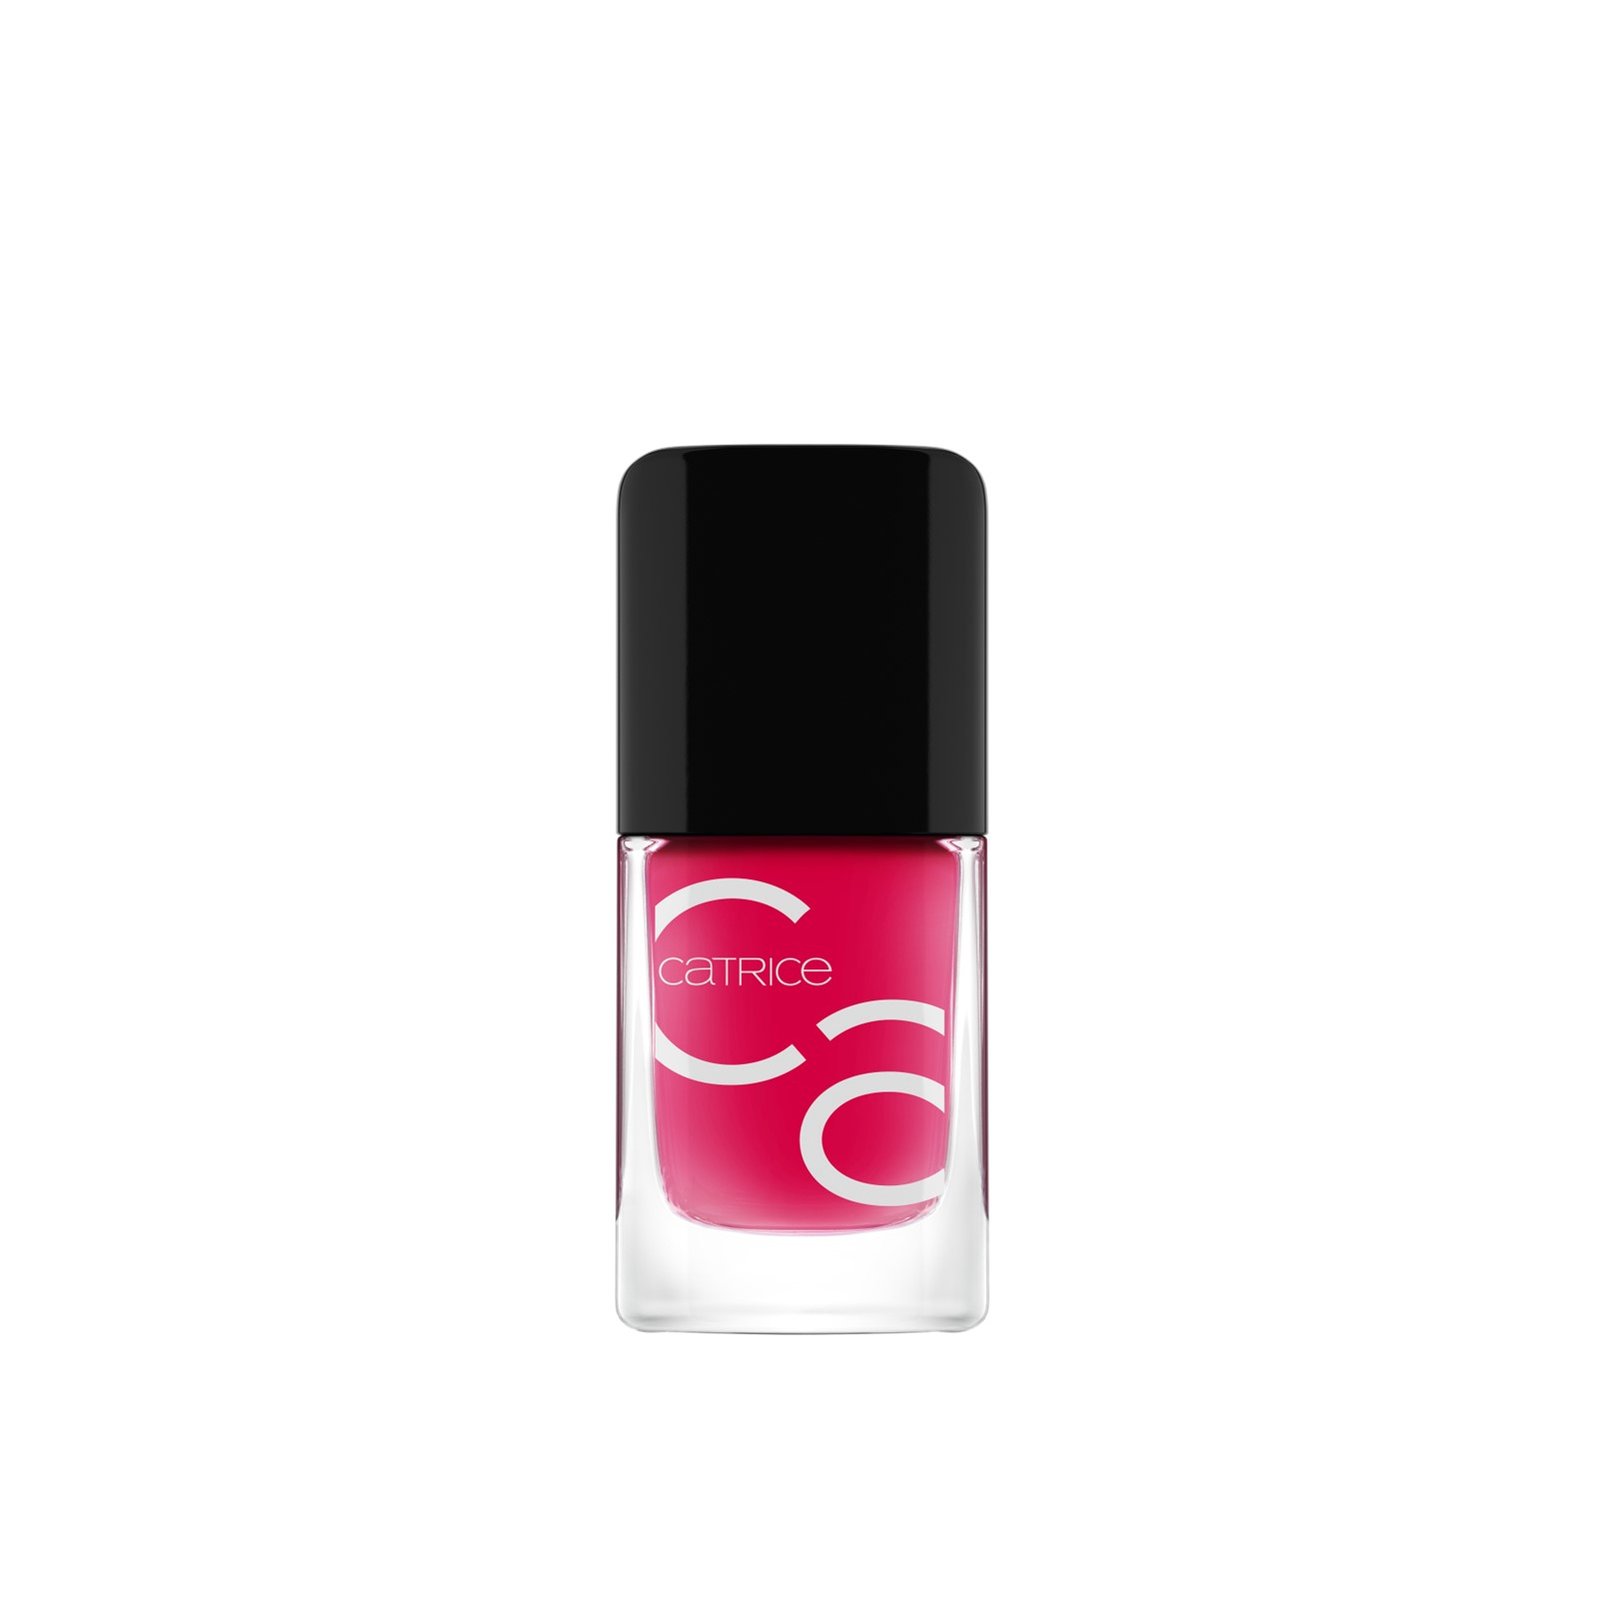 Catrice ICONails Gel Lacquer 141 Jelly-licious 10.5ml (0.35 fl oz)